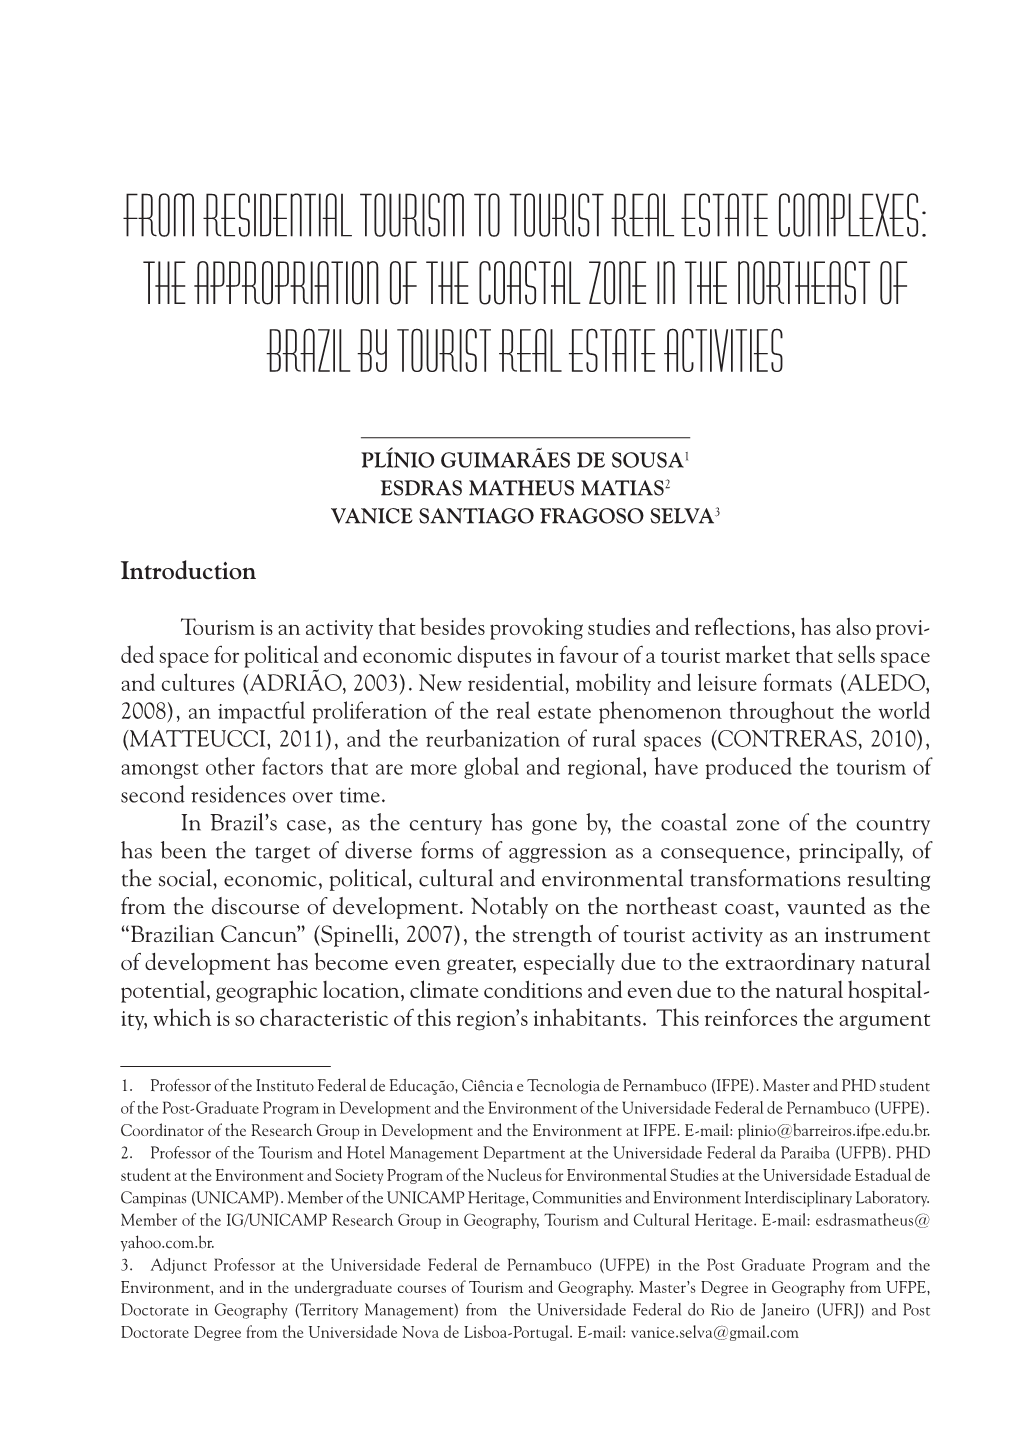 From Residential Tourism to Tourist Real Estate Complexes: the Appropriation of the Coastal Zone in the Northeast of Brazil by Tourist Real Estate Activities